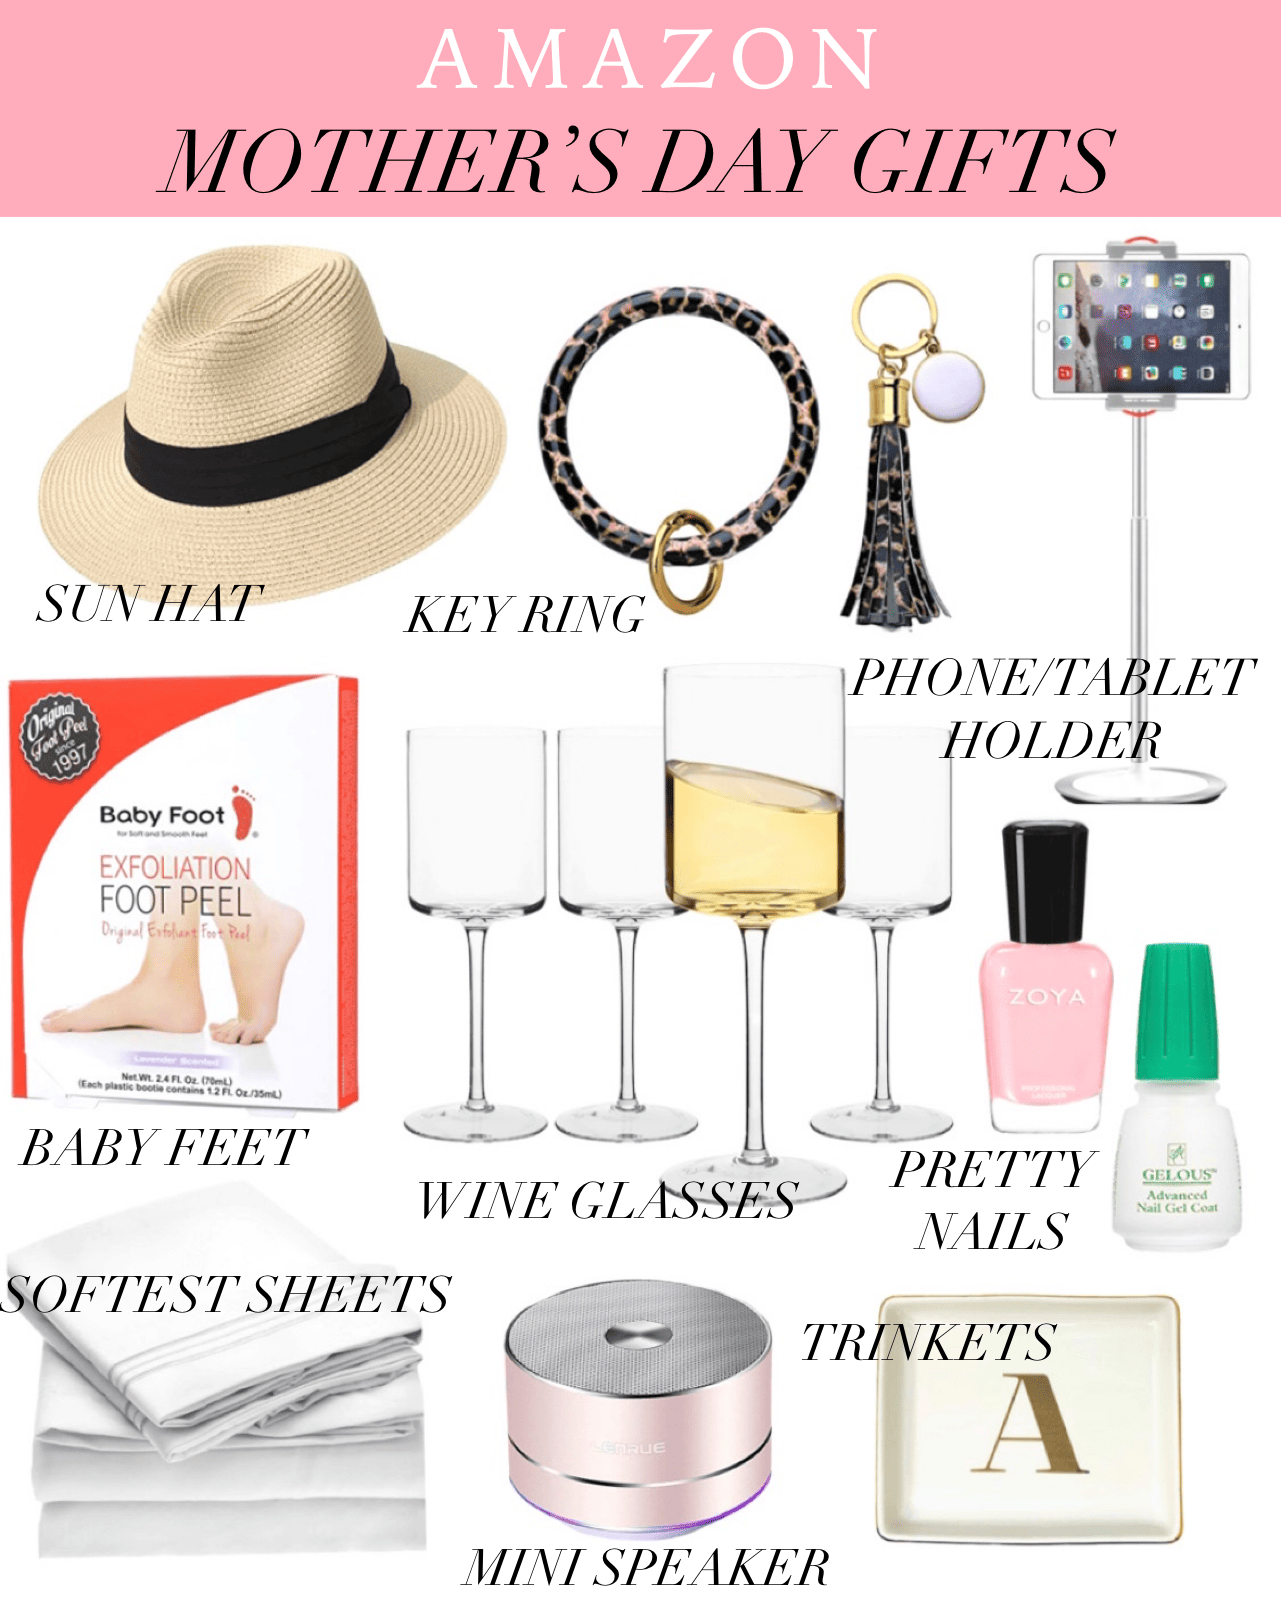 Mother's Day Gifts from Amazon